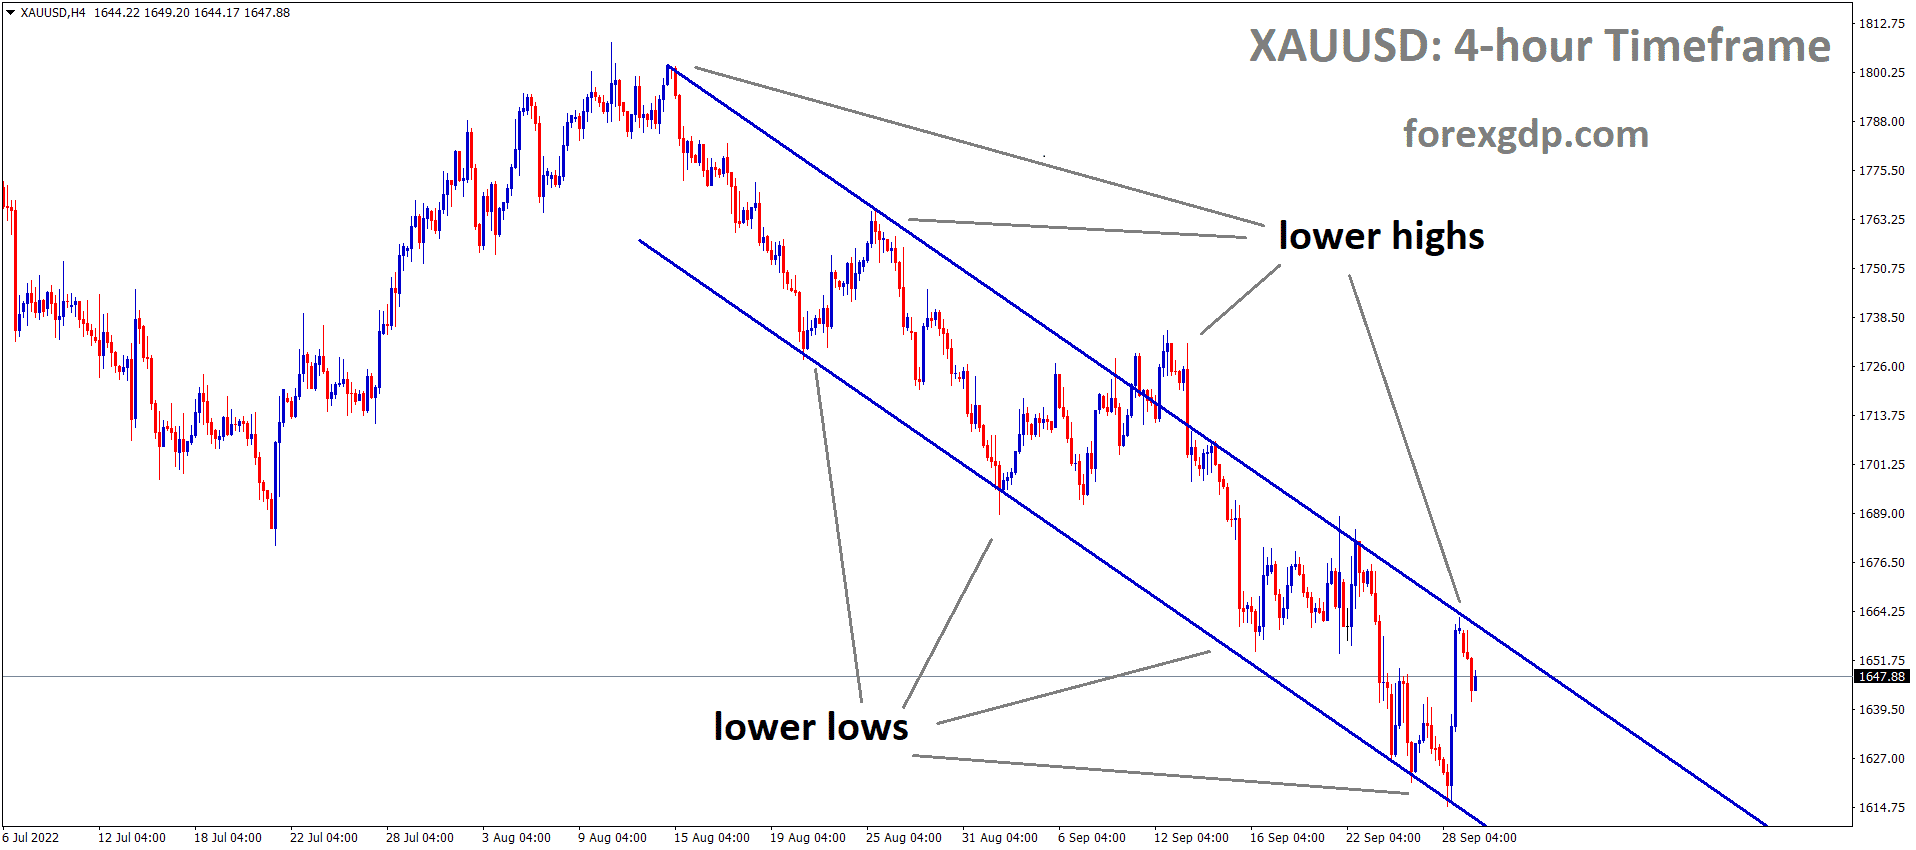 XAUUSD Gold price is moving in the Descending channel